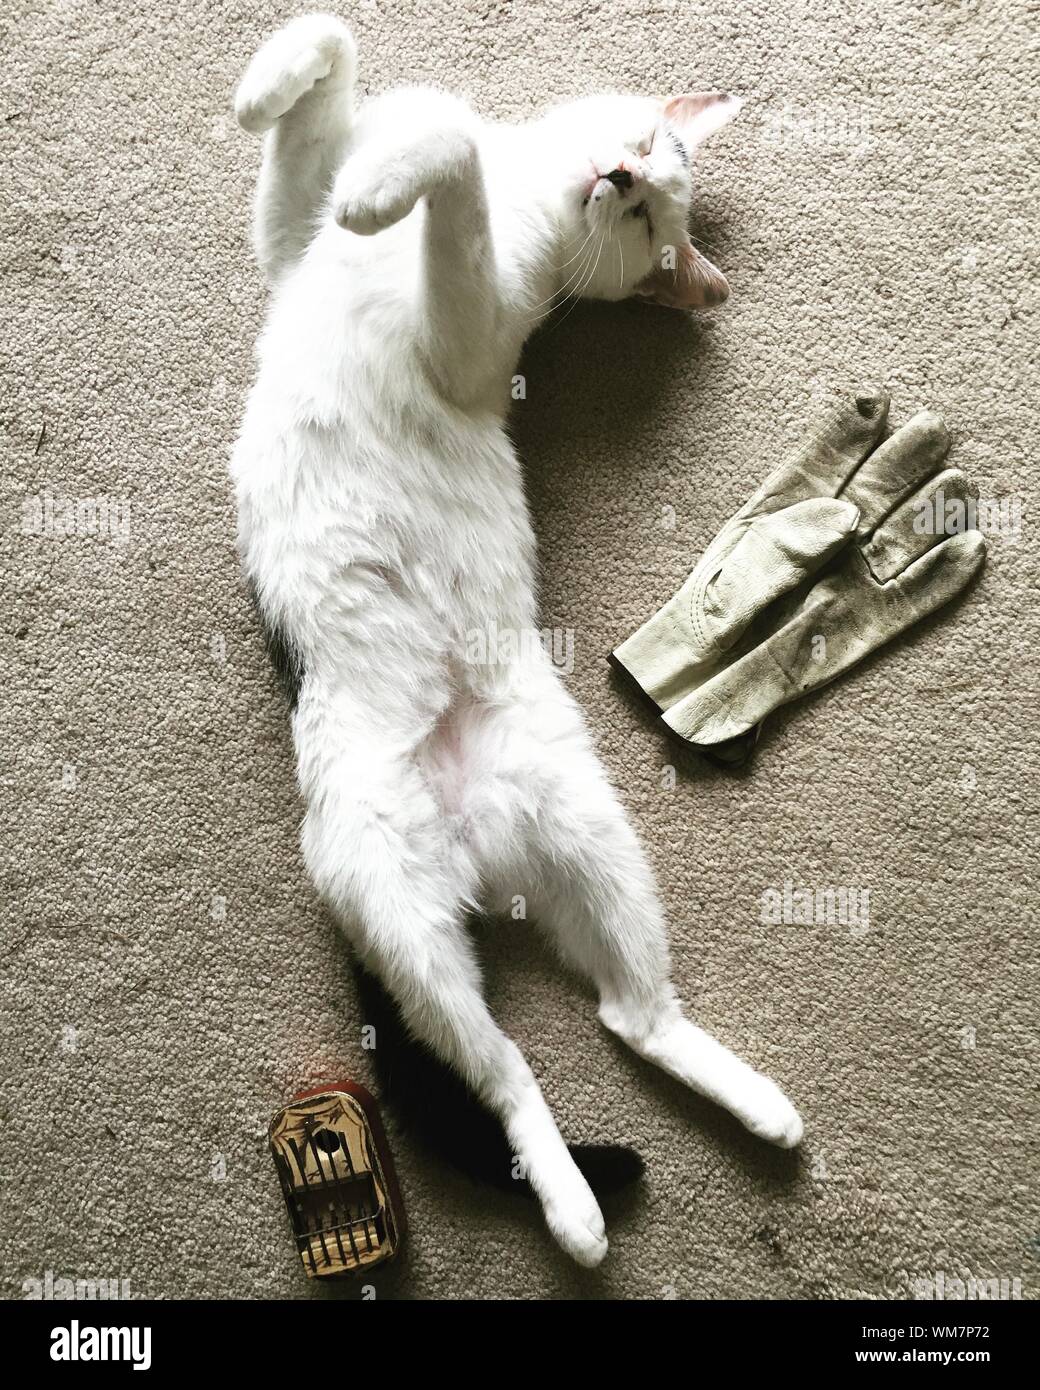 Directly Above Shot Of Cat Lying By Protective Glove Stock Photo